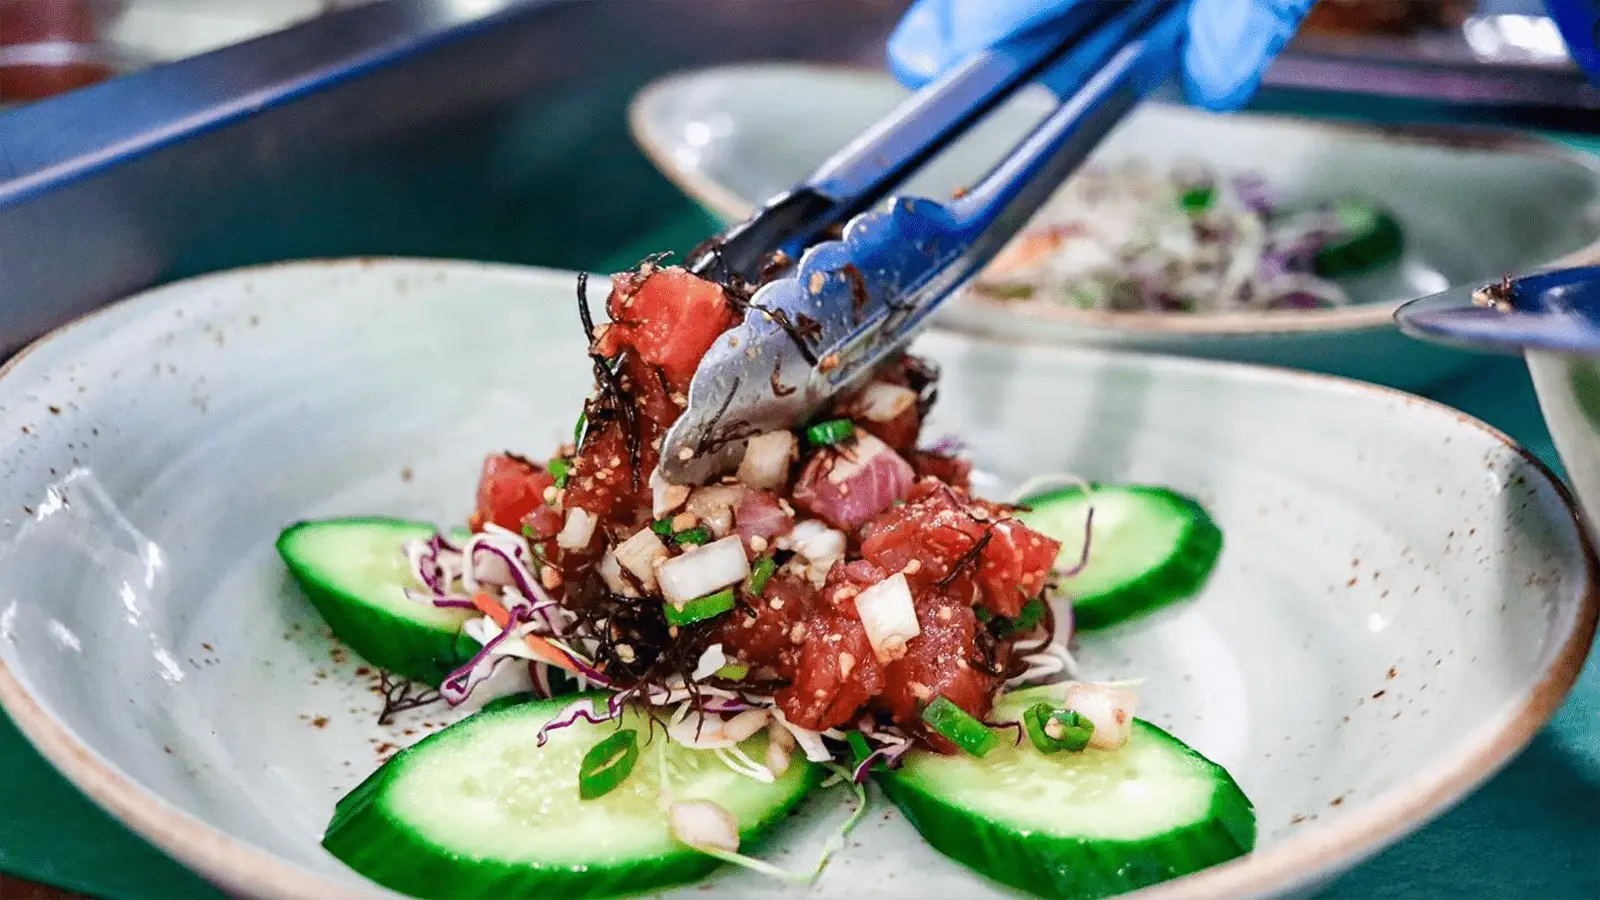 A person using tongs to place a portion of Best Poke Maui on a plate. The dish includes diced tuna, chopped onions, green onions, and sesame seeds, arranged atop a bed of shredded vegetables and surrounded by cucumber slices. The person is wearing blue gloves.